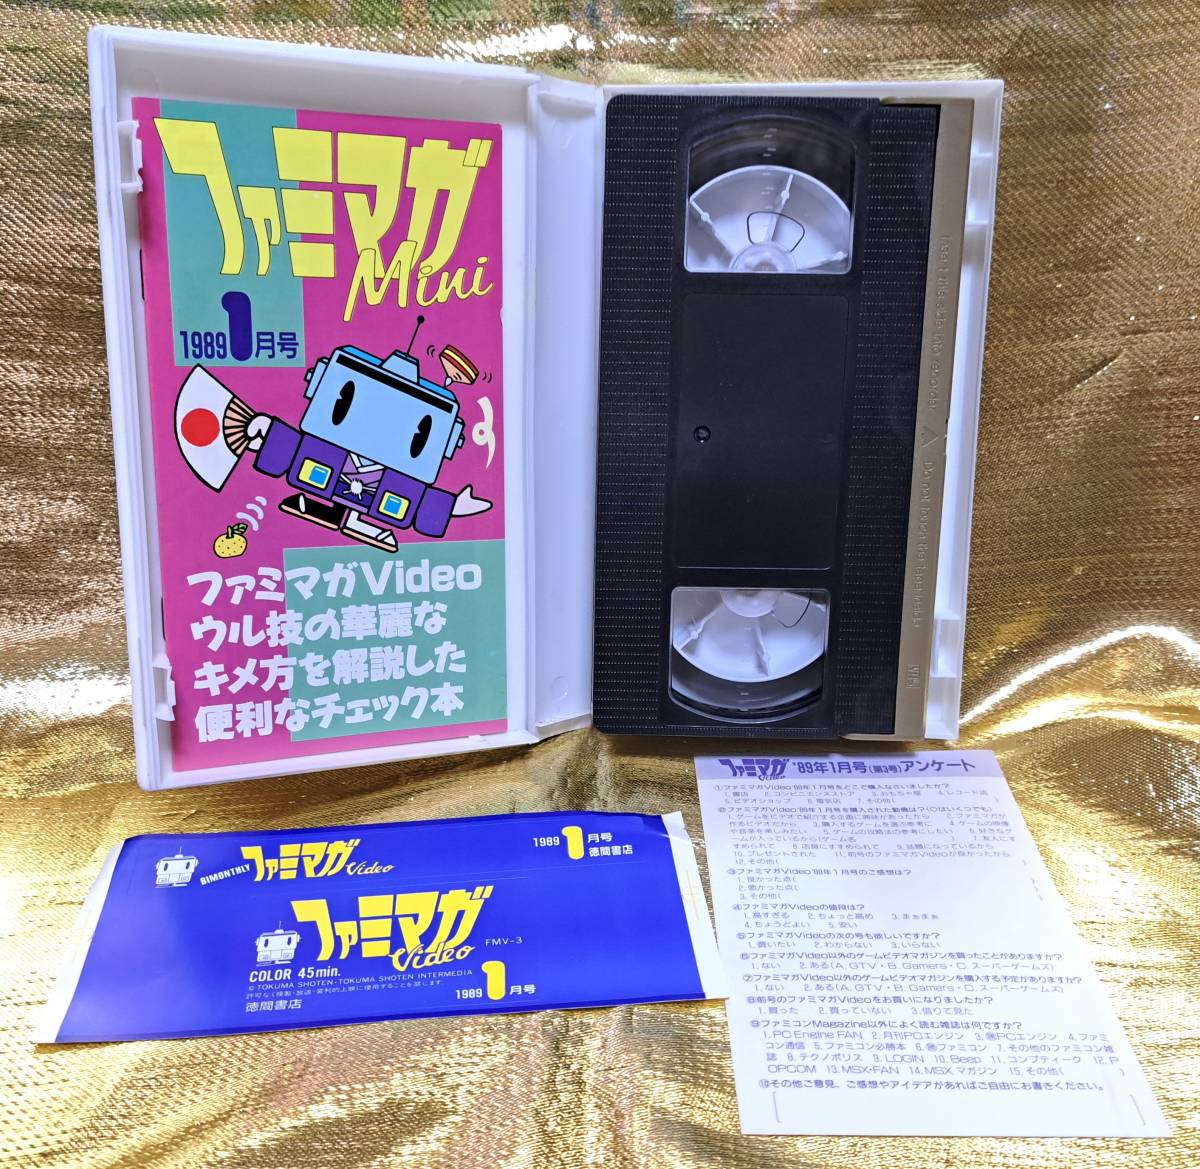  game video famimagavideo 1989 1 month number glati light Ⅱ* Super Mario Brothers 3 etc. 